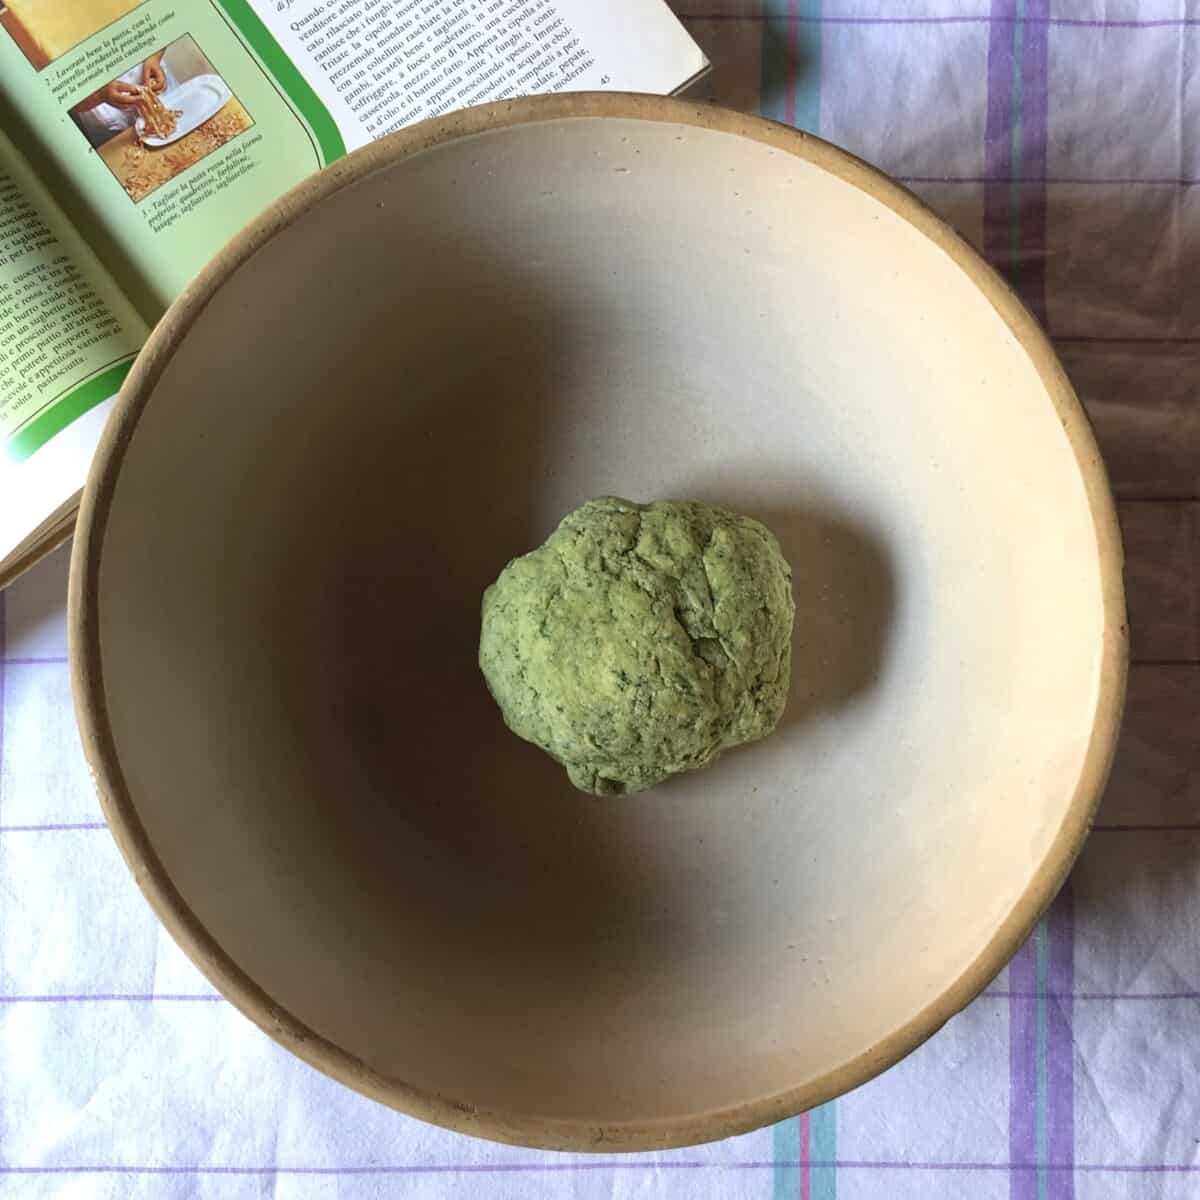 a very shaggy and rough looking green ball of spinach pasta dough just formed